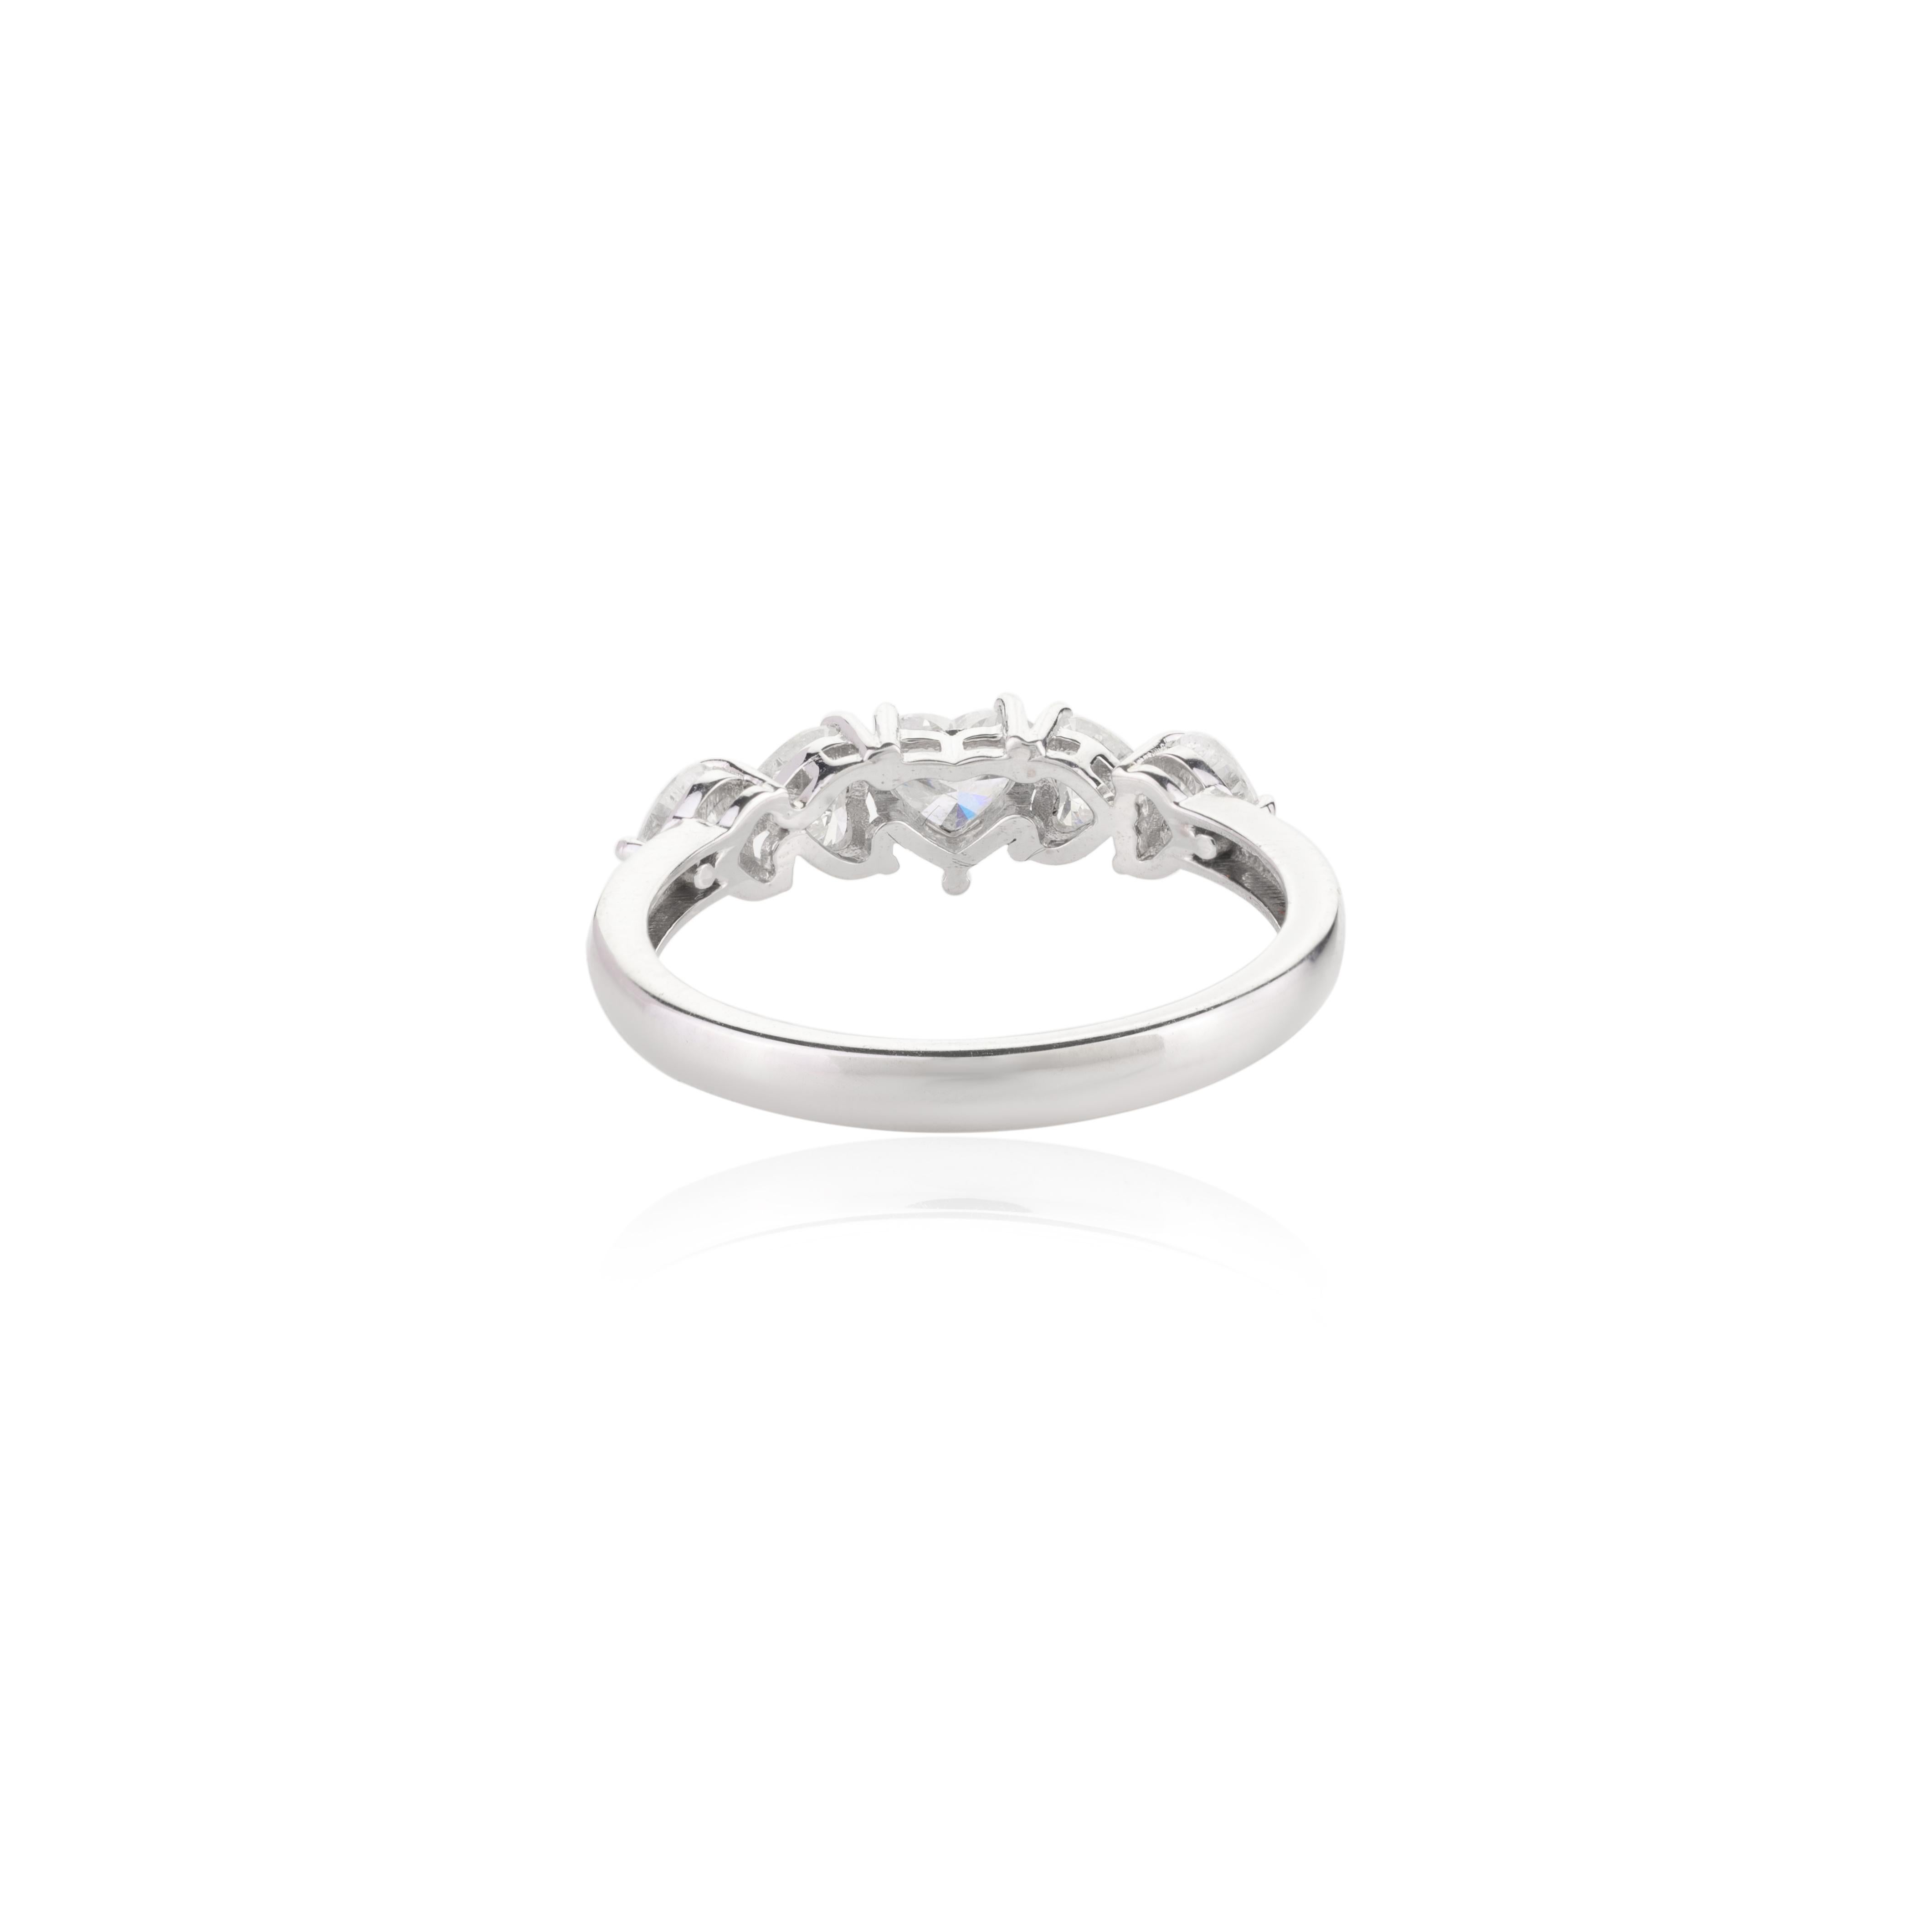 For Sale:  Five Diamond Heart Engagement Band Ring in 18k Solid White Gold 5